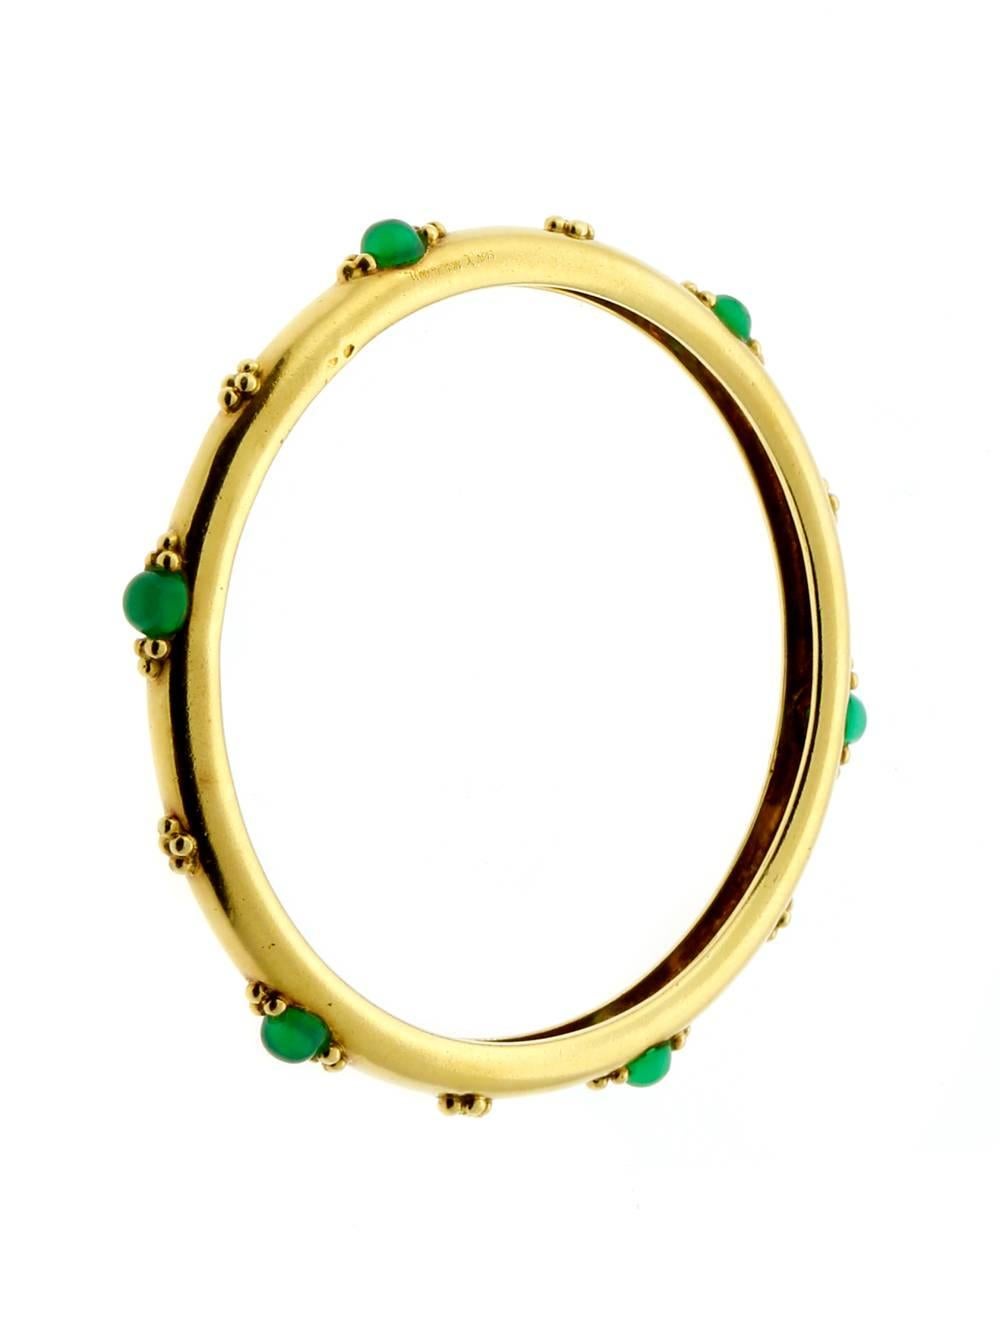 A classic 18k yellow gold bangle by Boucheron showing lovely patina, featuring 6 cabochon emeralds. The bracelets internal diameter is 2.25